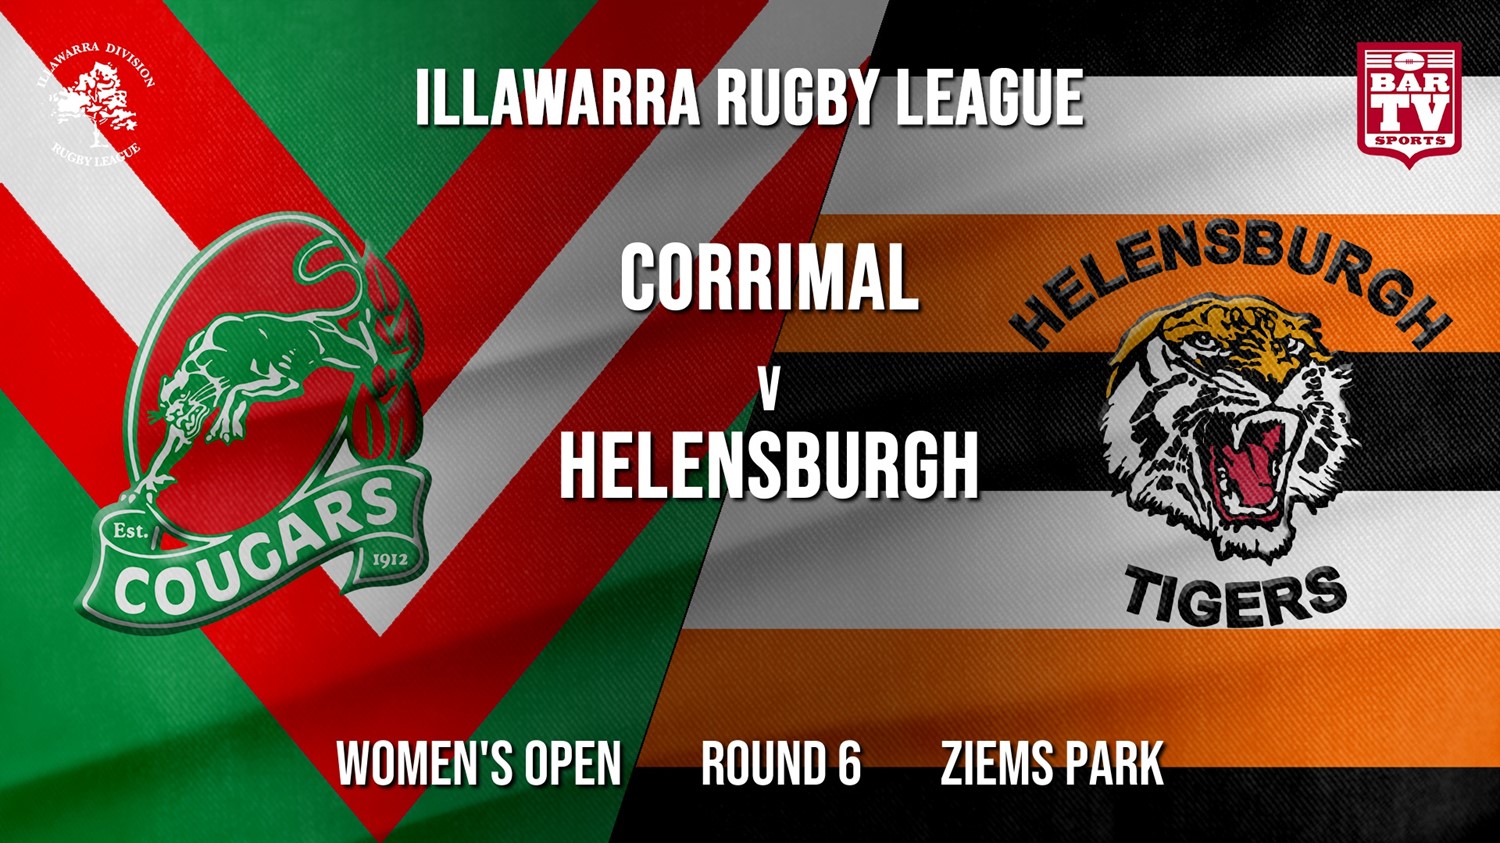 IRL Round 6 - Women's Open - Corrimal Cougars v Helensburgh Tigers Minigame Slate Image